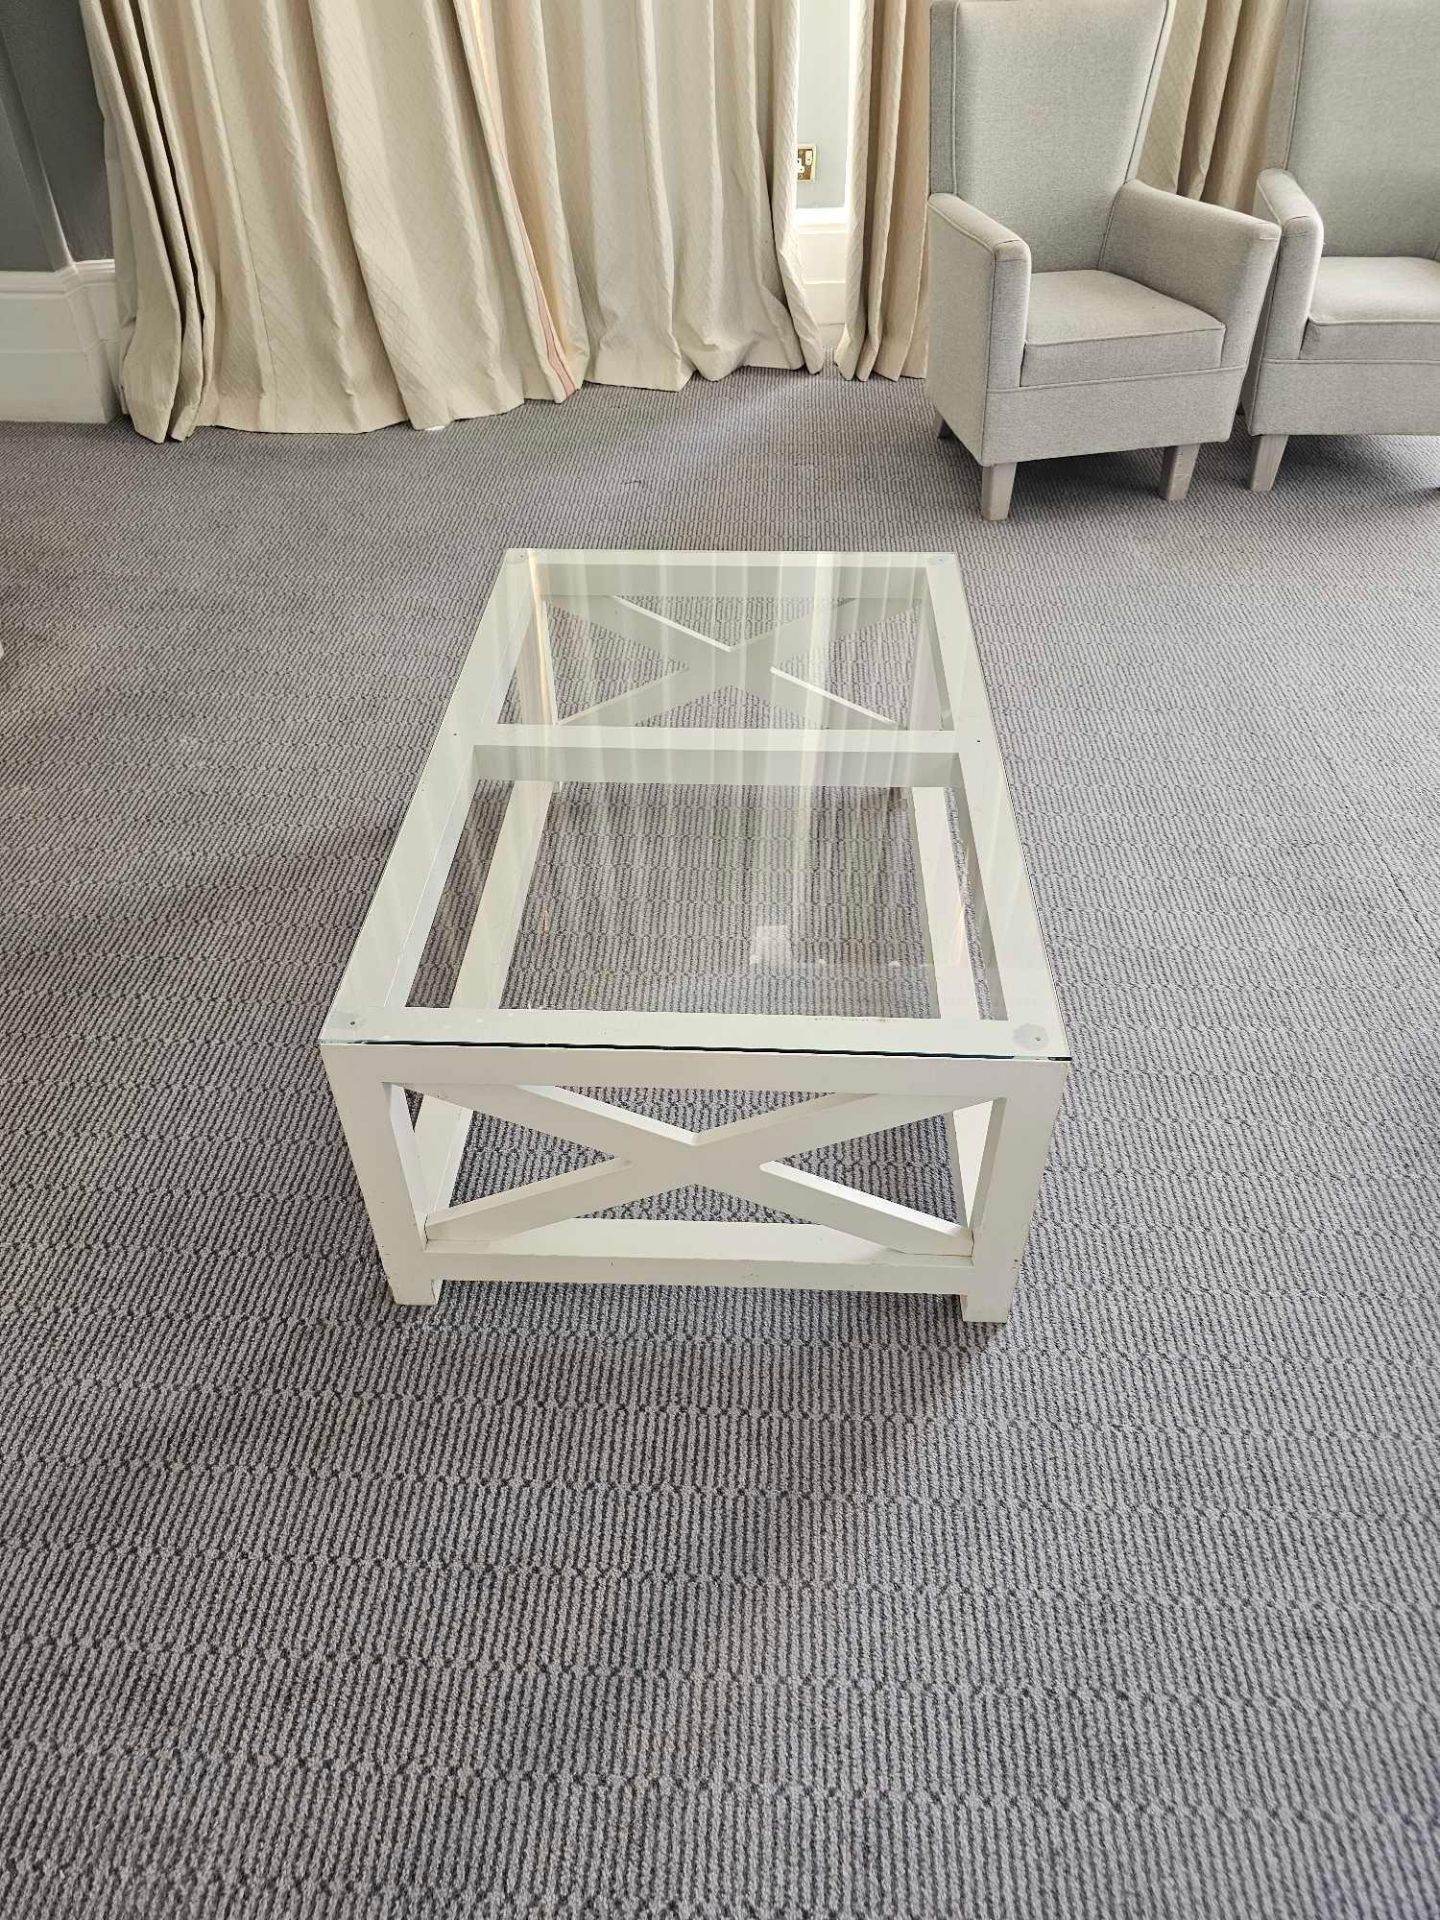 Coffee Table Designed With Tempered Glass Top That Is Scratch-Resistant And Durable, The Cross - Image 2 of 3